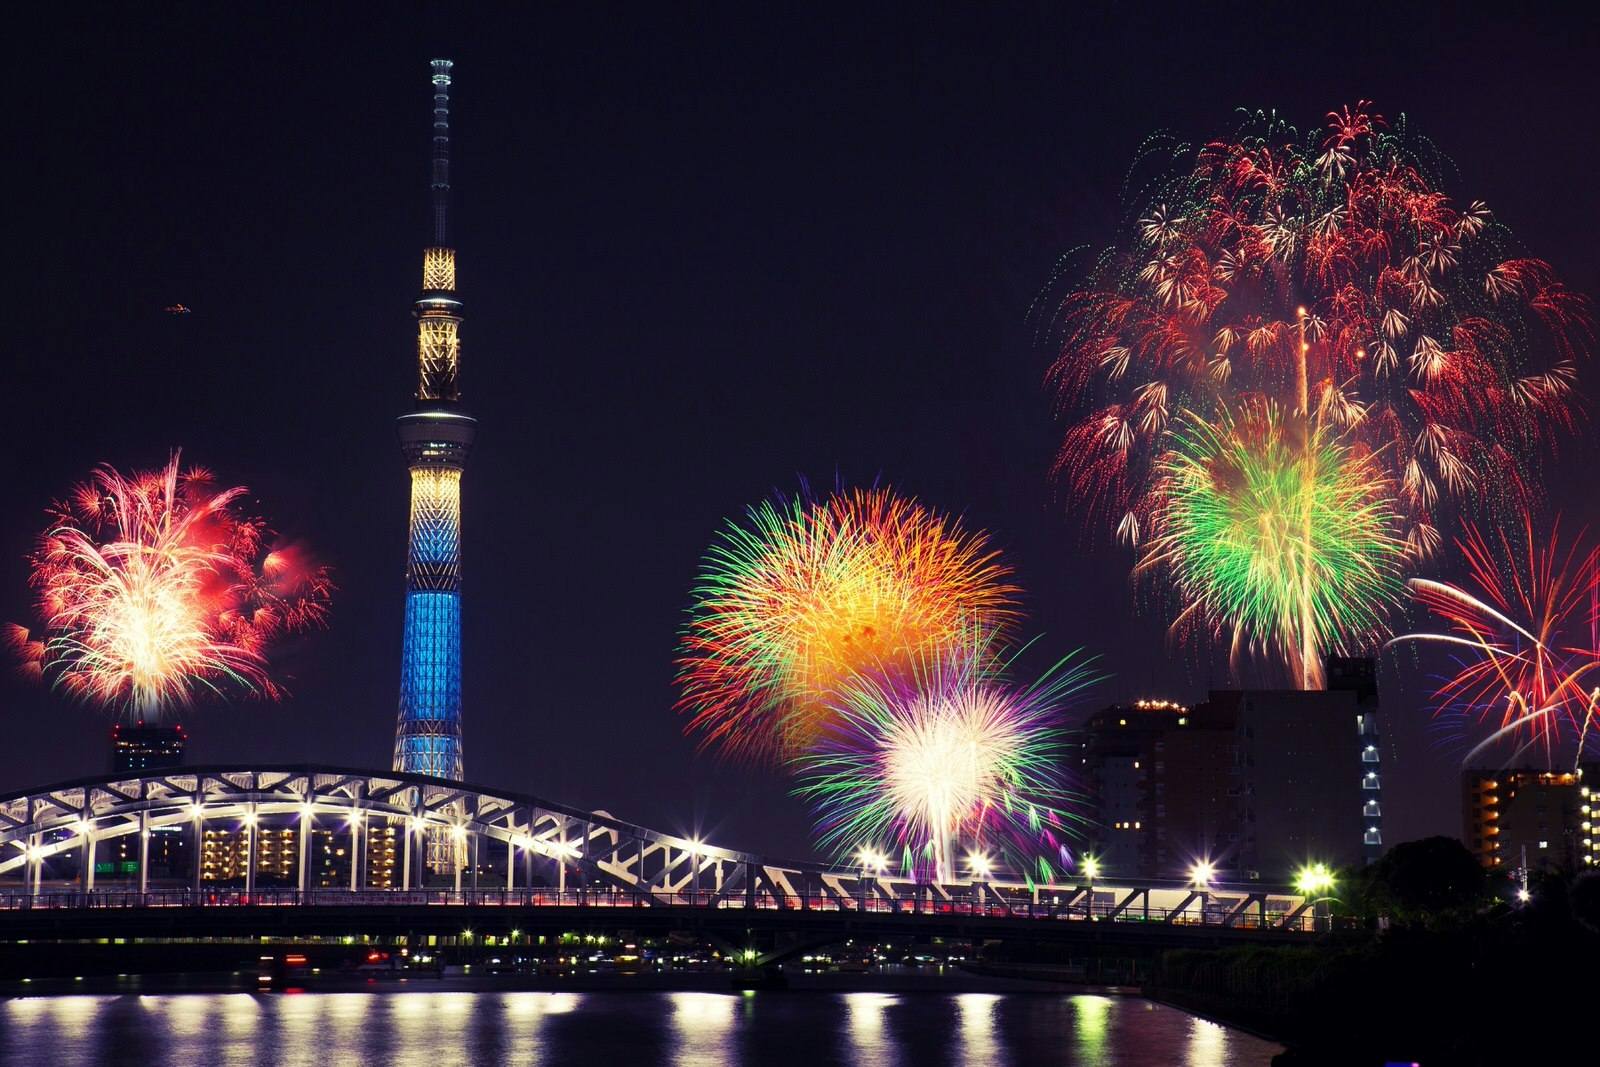 Tokyo summer - Fireworks explode over the Sumida river at night